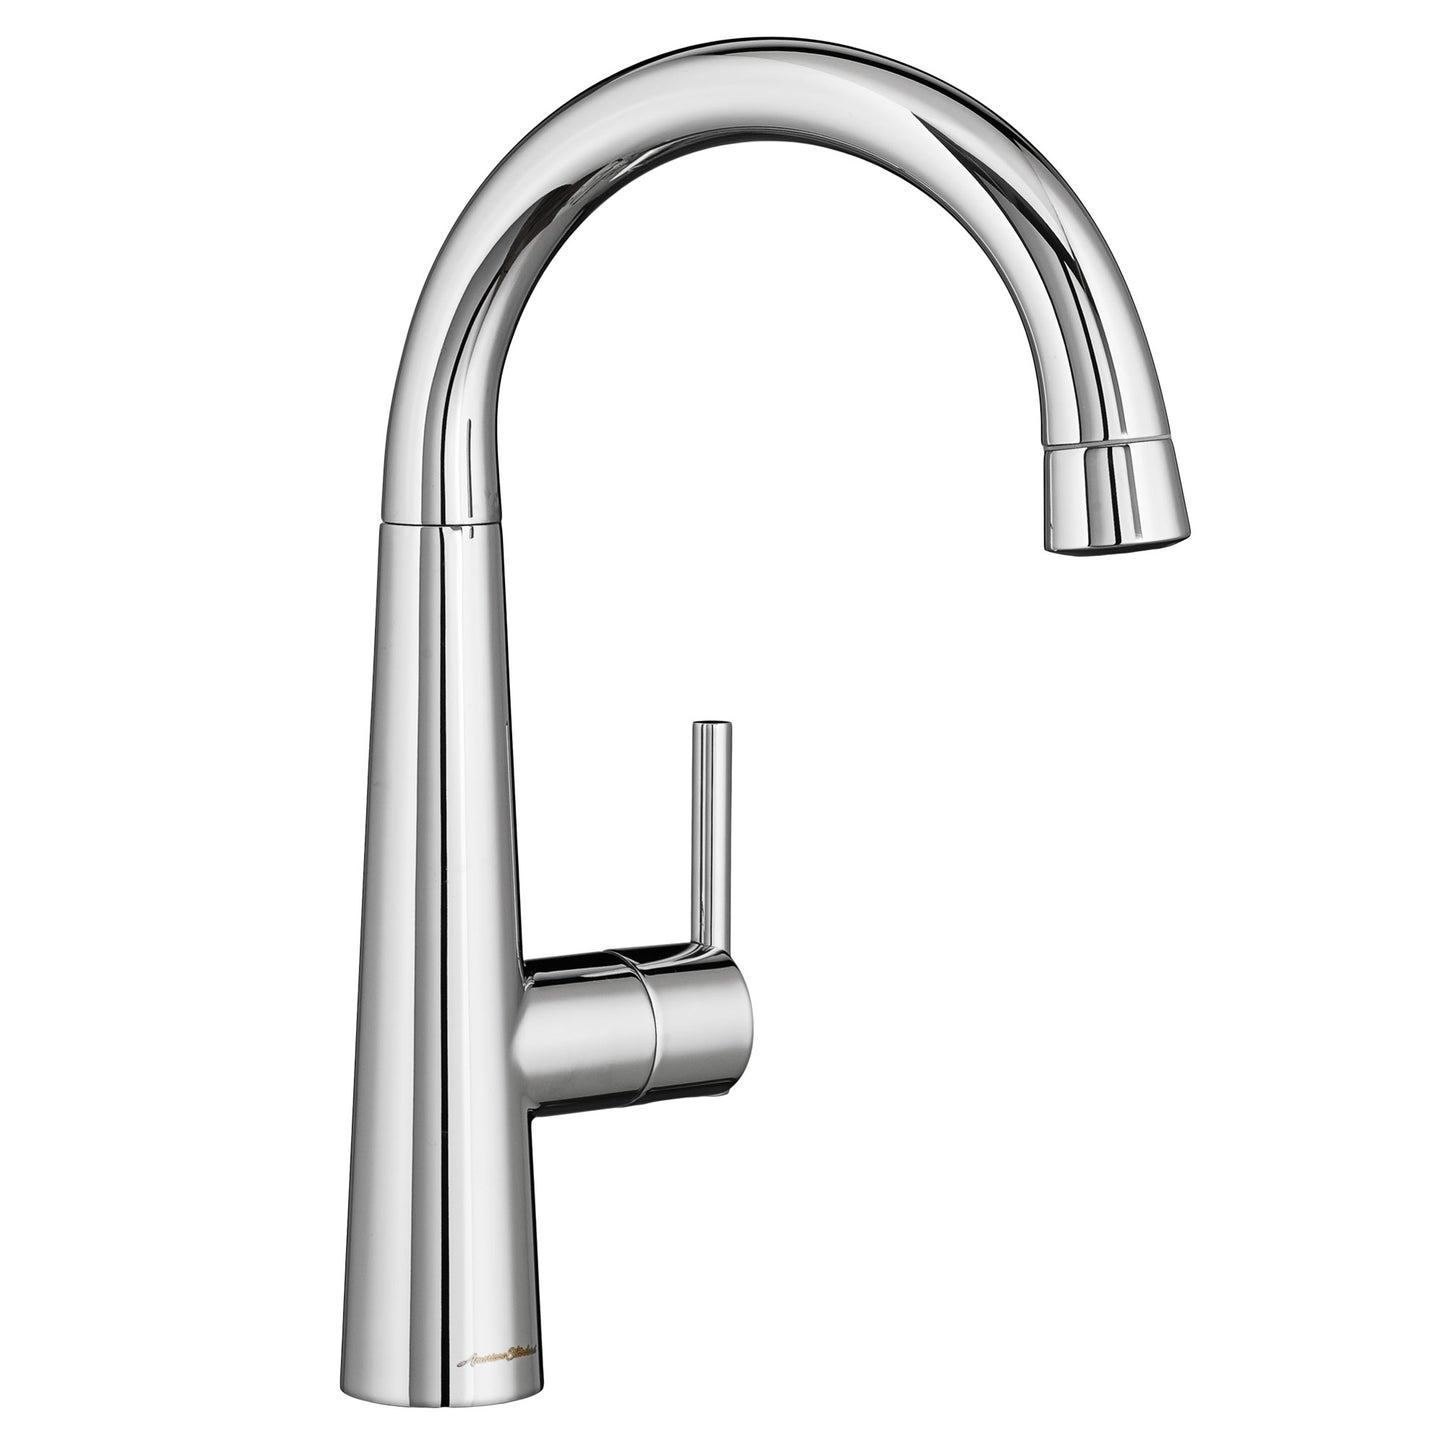 AMERICAN-STANDARD 4932410.002, Edgewater Single-Handle Pull-Down Single Spray Bar Faucet 1.5 gpm/5.7 L/min in Chrome